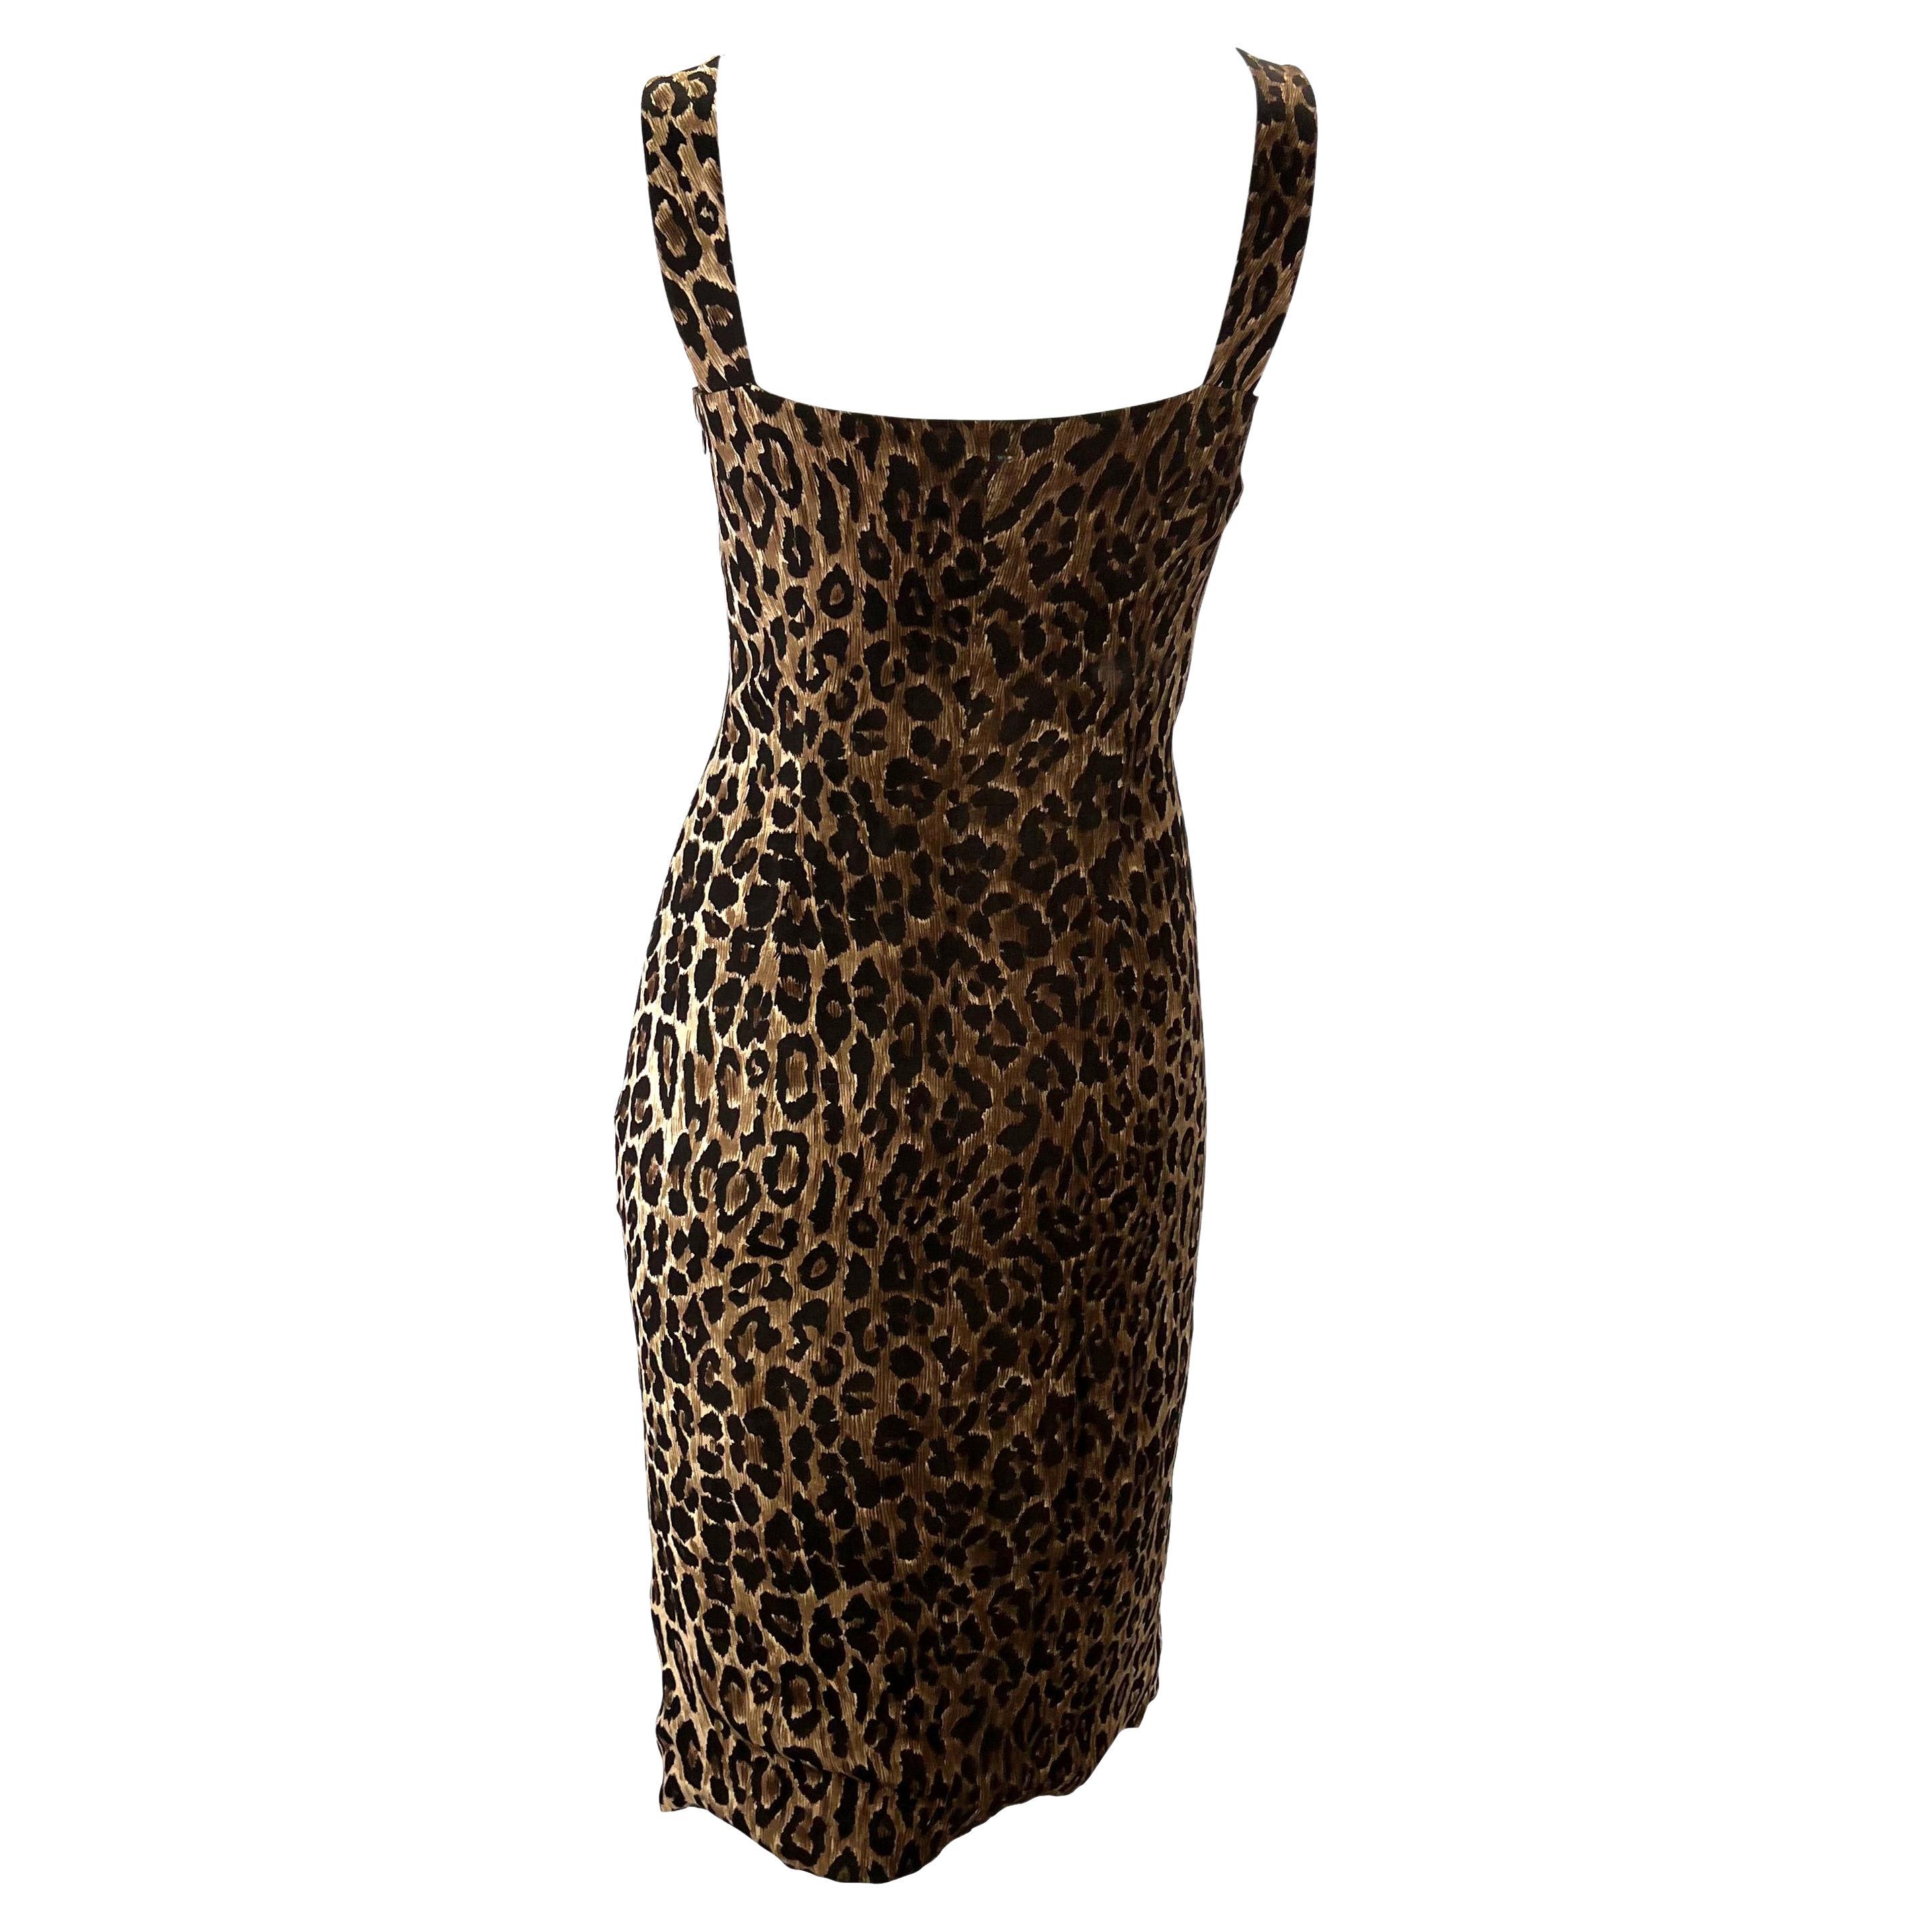 S/S 1997 Dolce & Gabbana Cheetah Print Silk Sleeveless Bodycon Pin-Up Dress In Excellent Condition For Sale In West Hollywood, CA